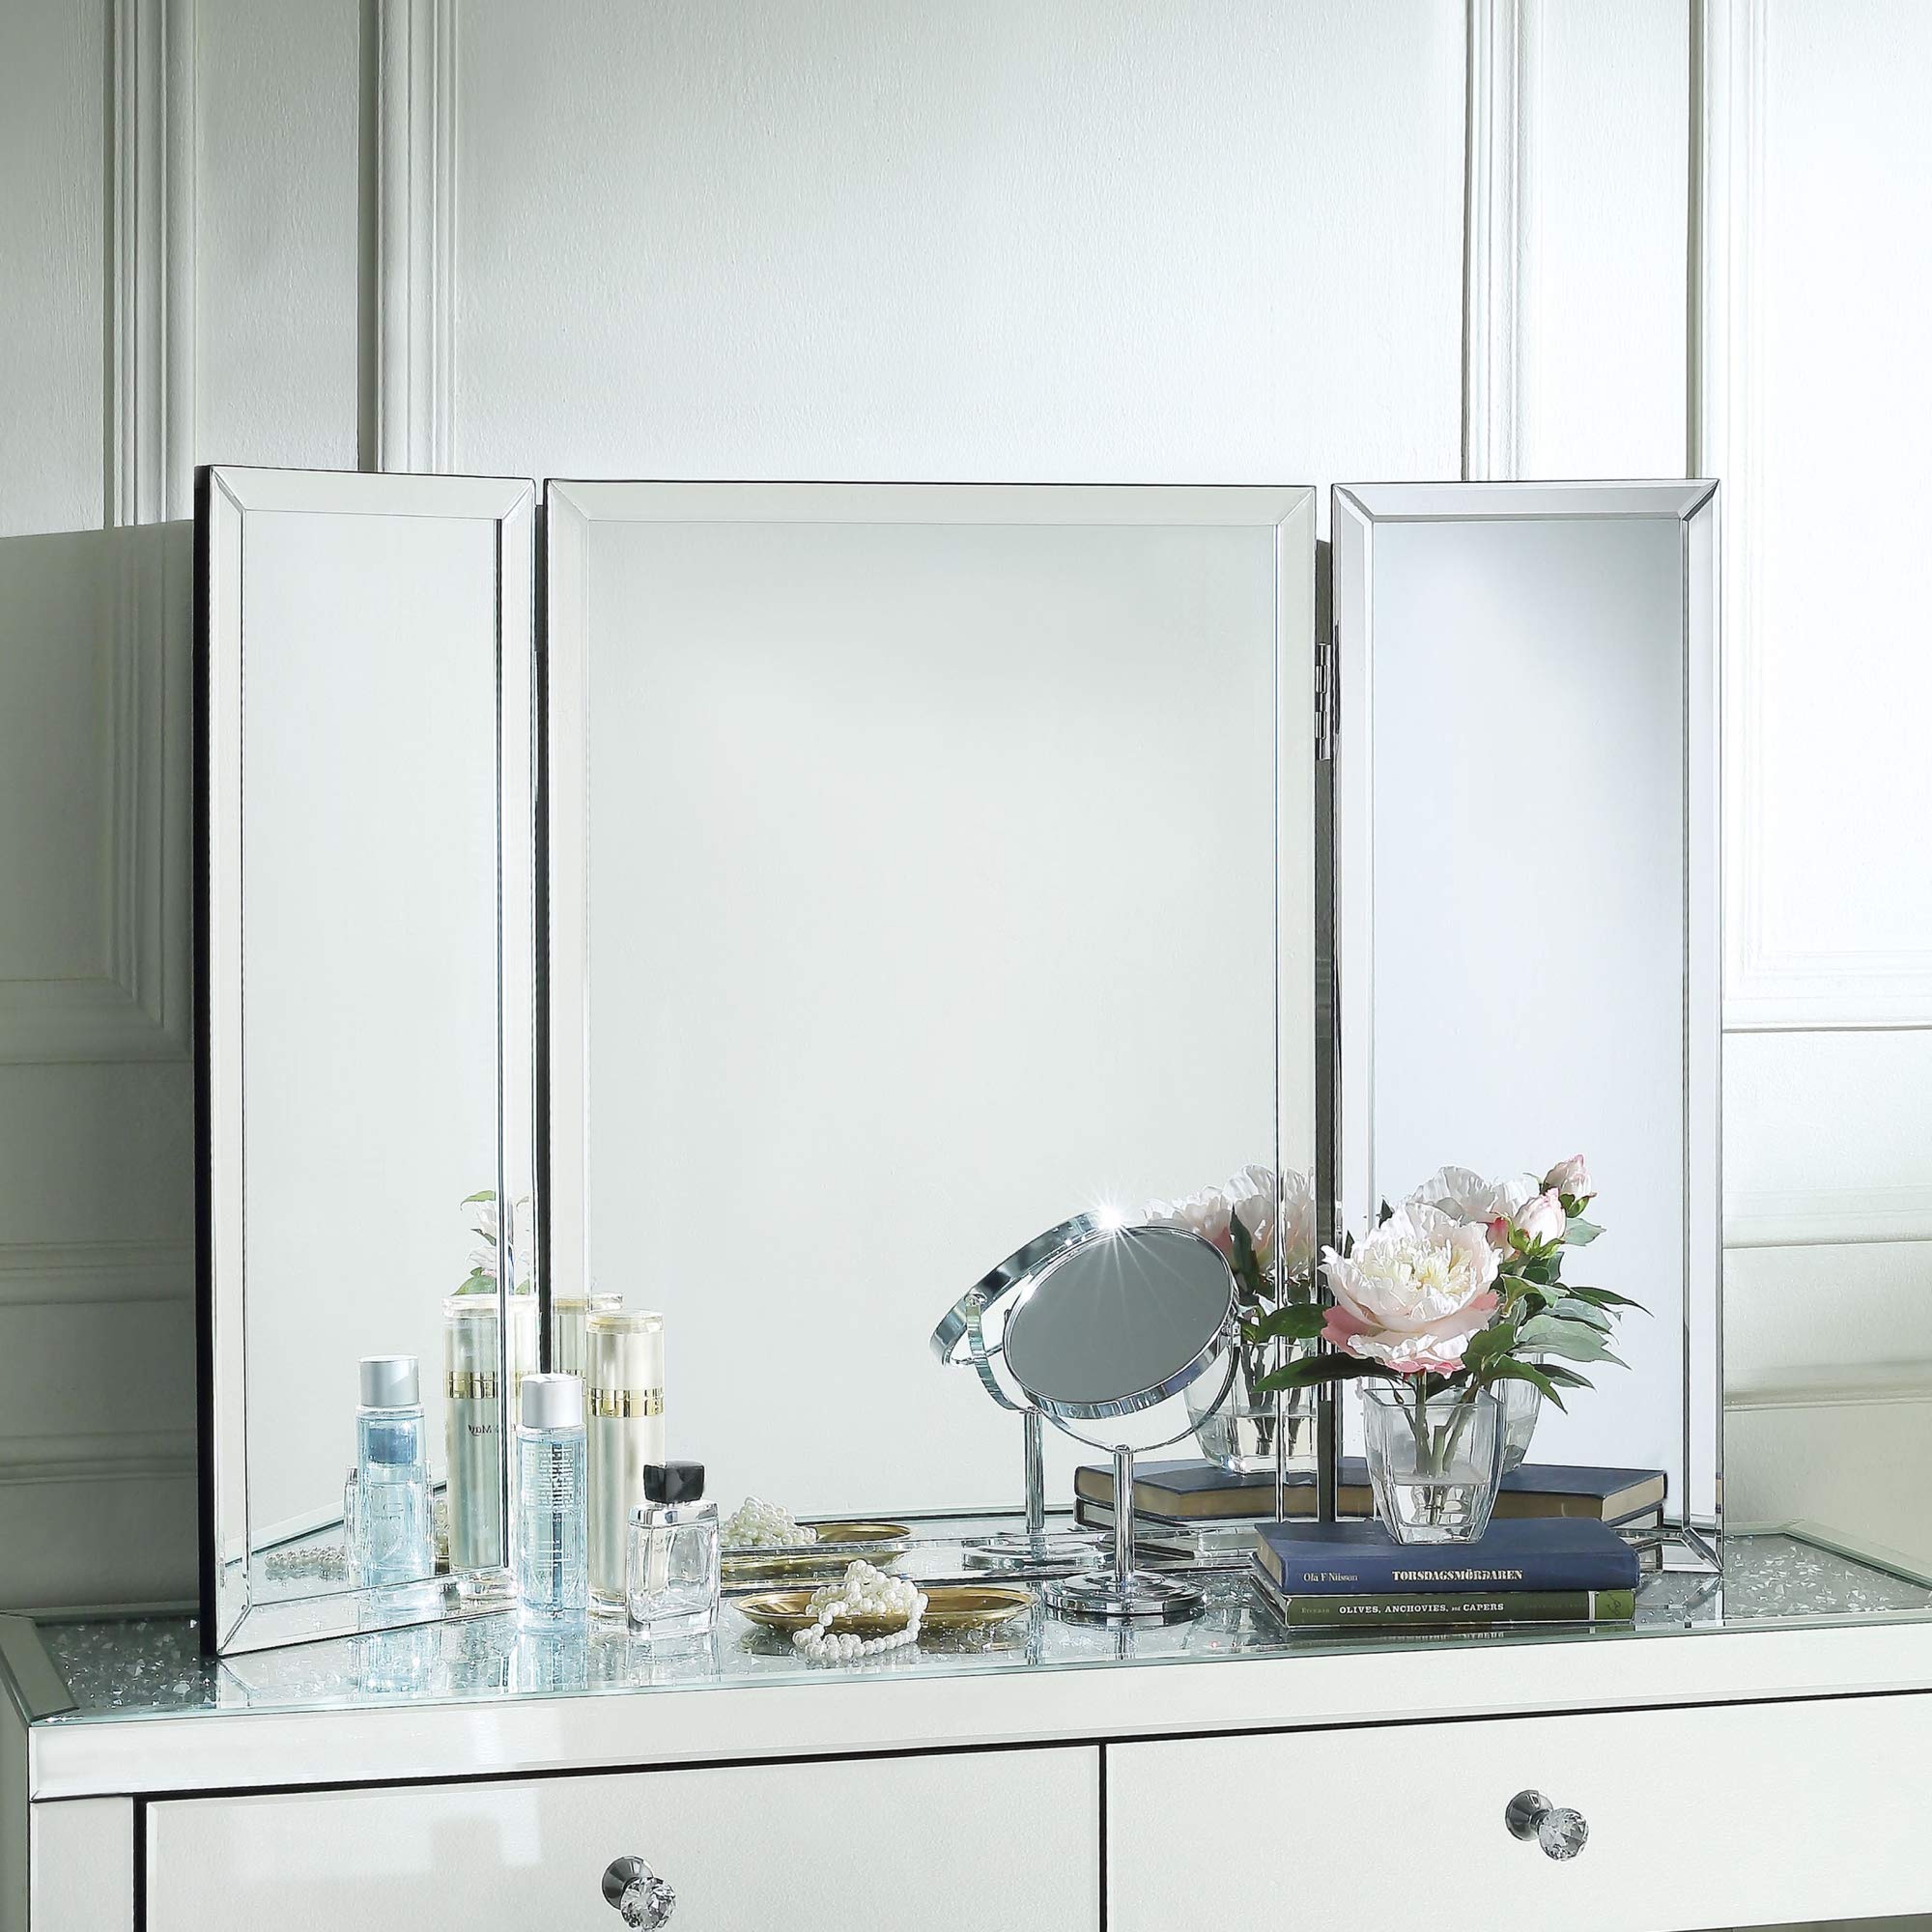 Inspired Home Tabletop Vanity Mirror - Design Tanith Tri-fold Mirrored Frame Free Standing or Wall Mounted 28 x 39